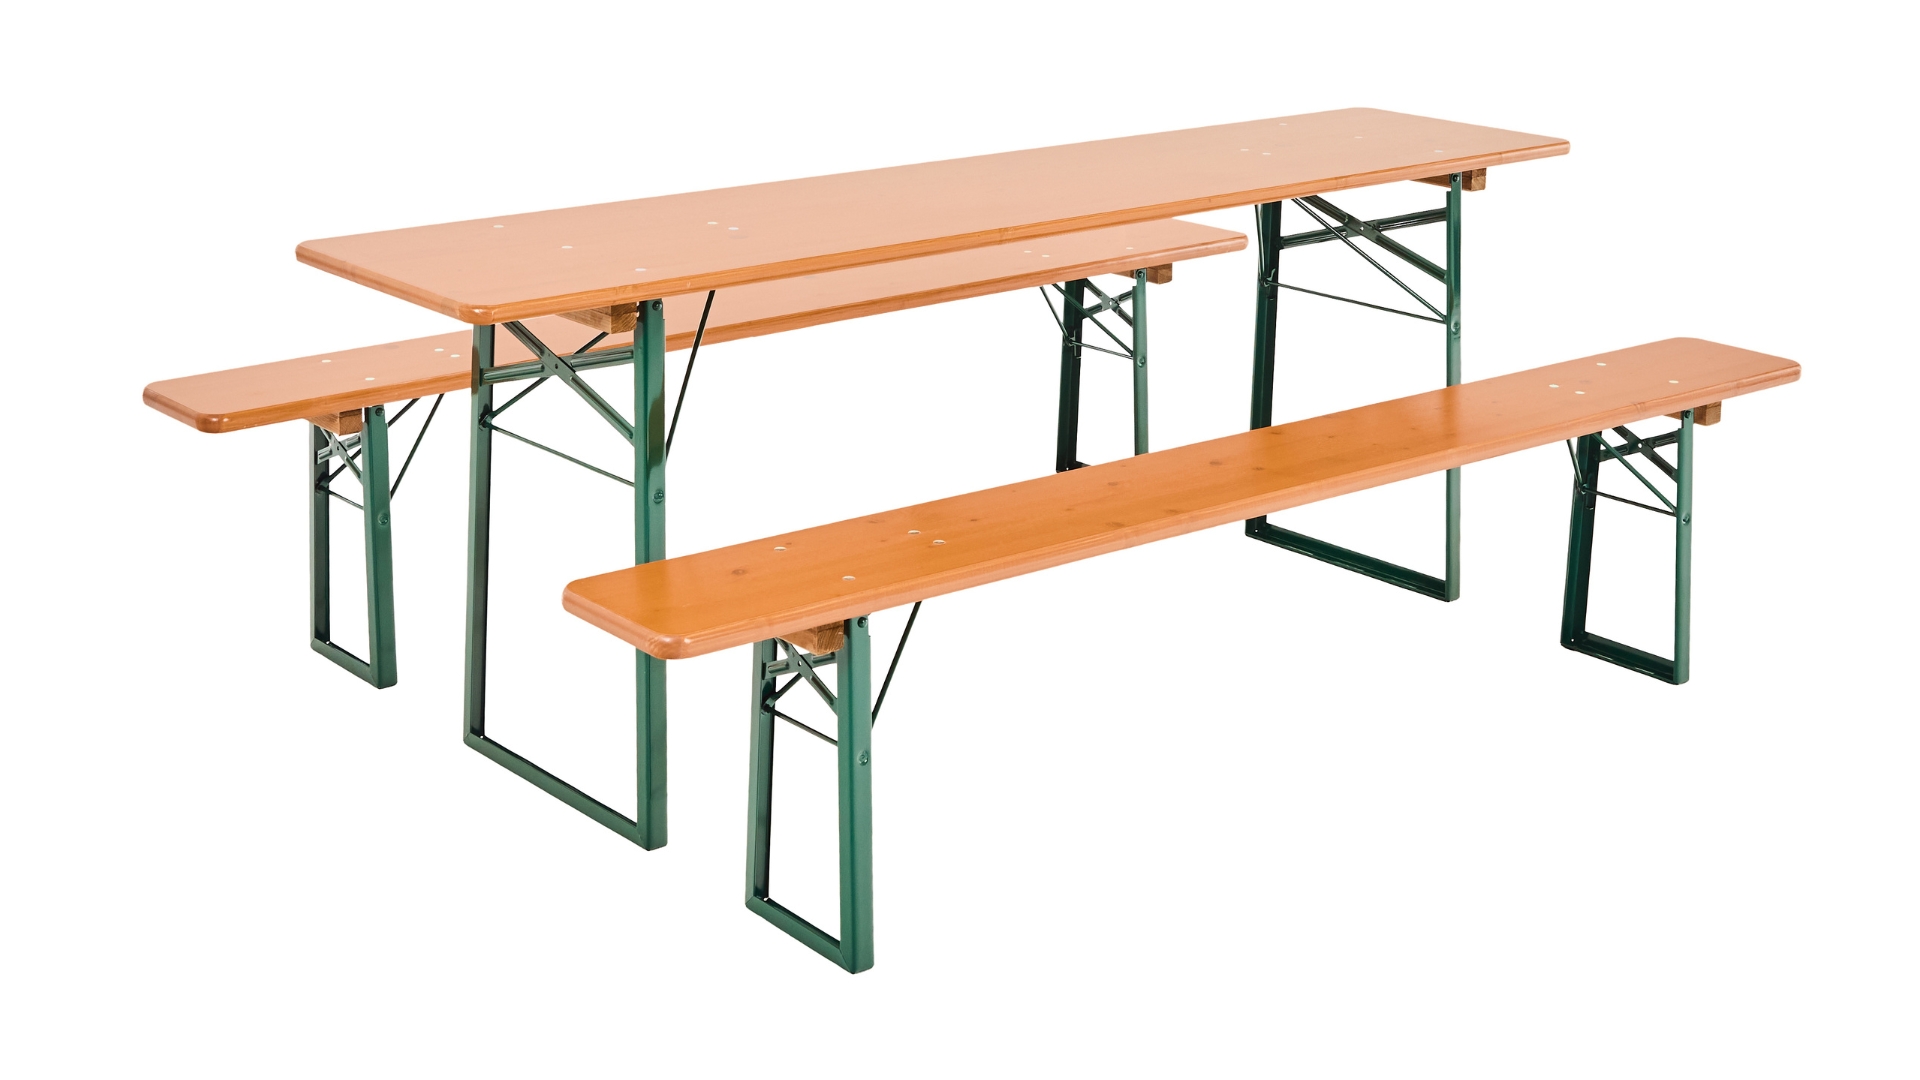 The classic beer garden table sets in the color pine.